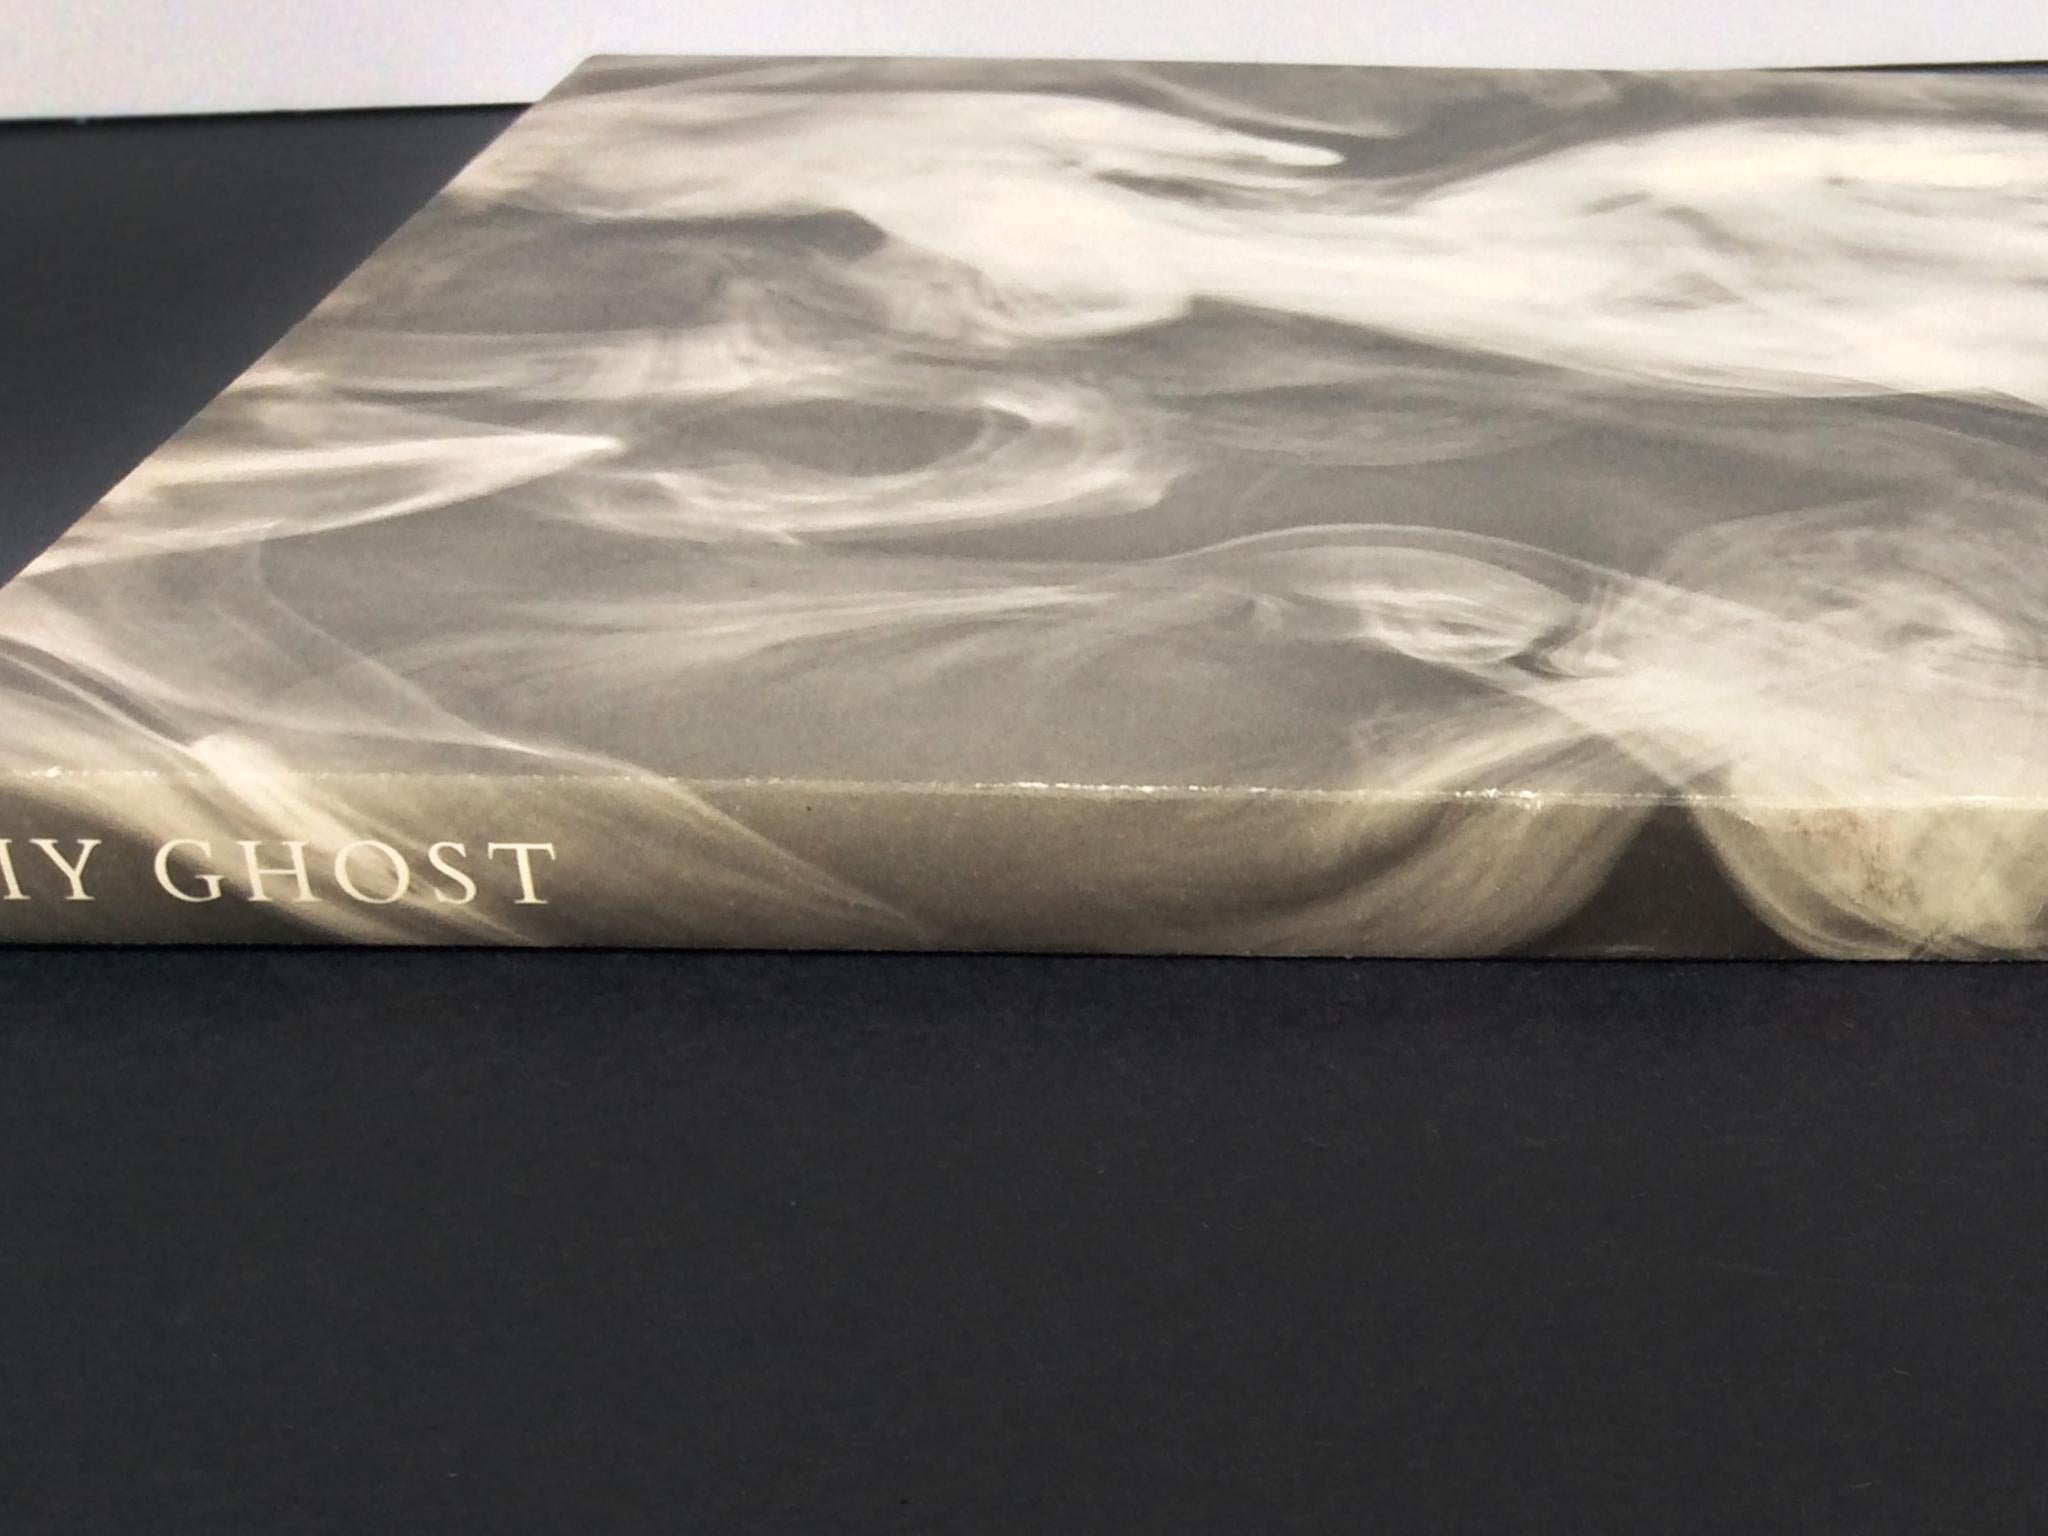 Monograph collecting the evocative daguerreotypes of Adam Fuss. The artist's ethereal and indeed ghostly images are accompanied by text. Beautifully set, hardbound with a dark-blue linen. Illustrated dust jacket.

Limited edition. Signed and